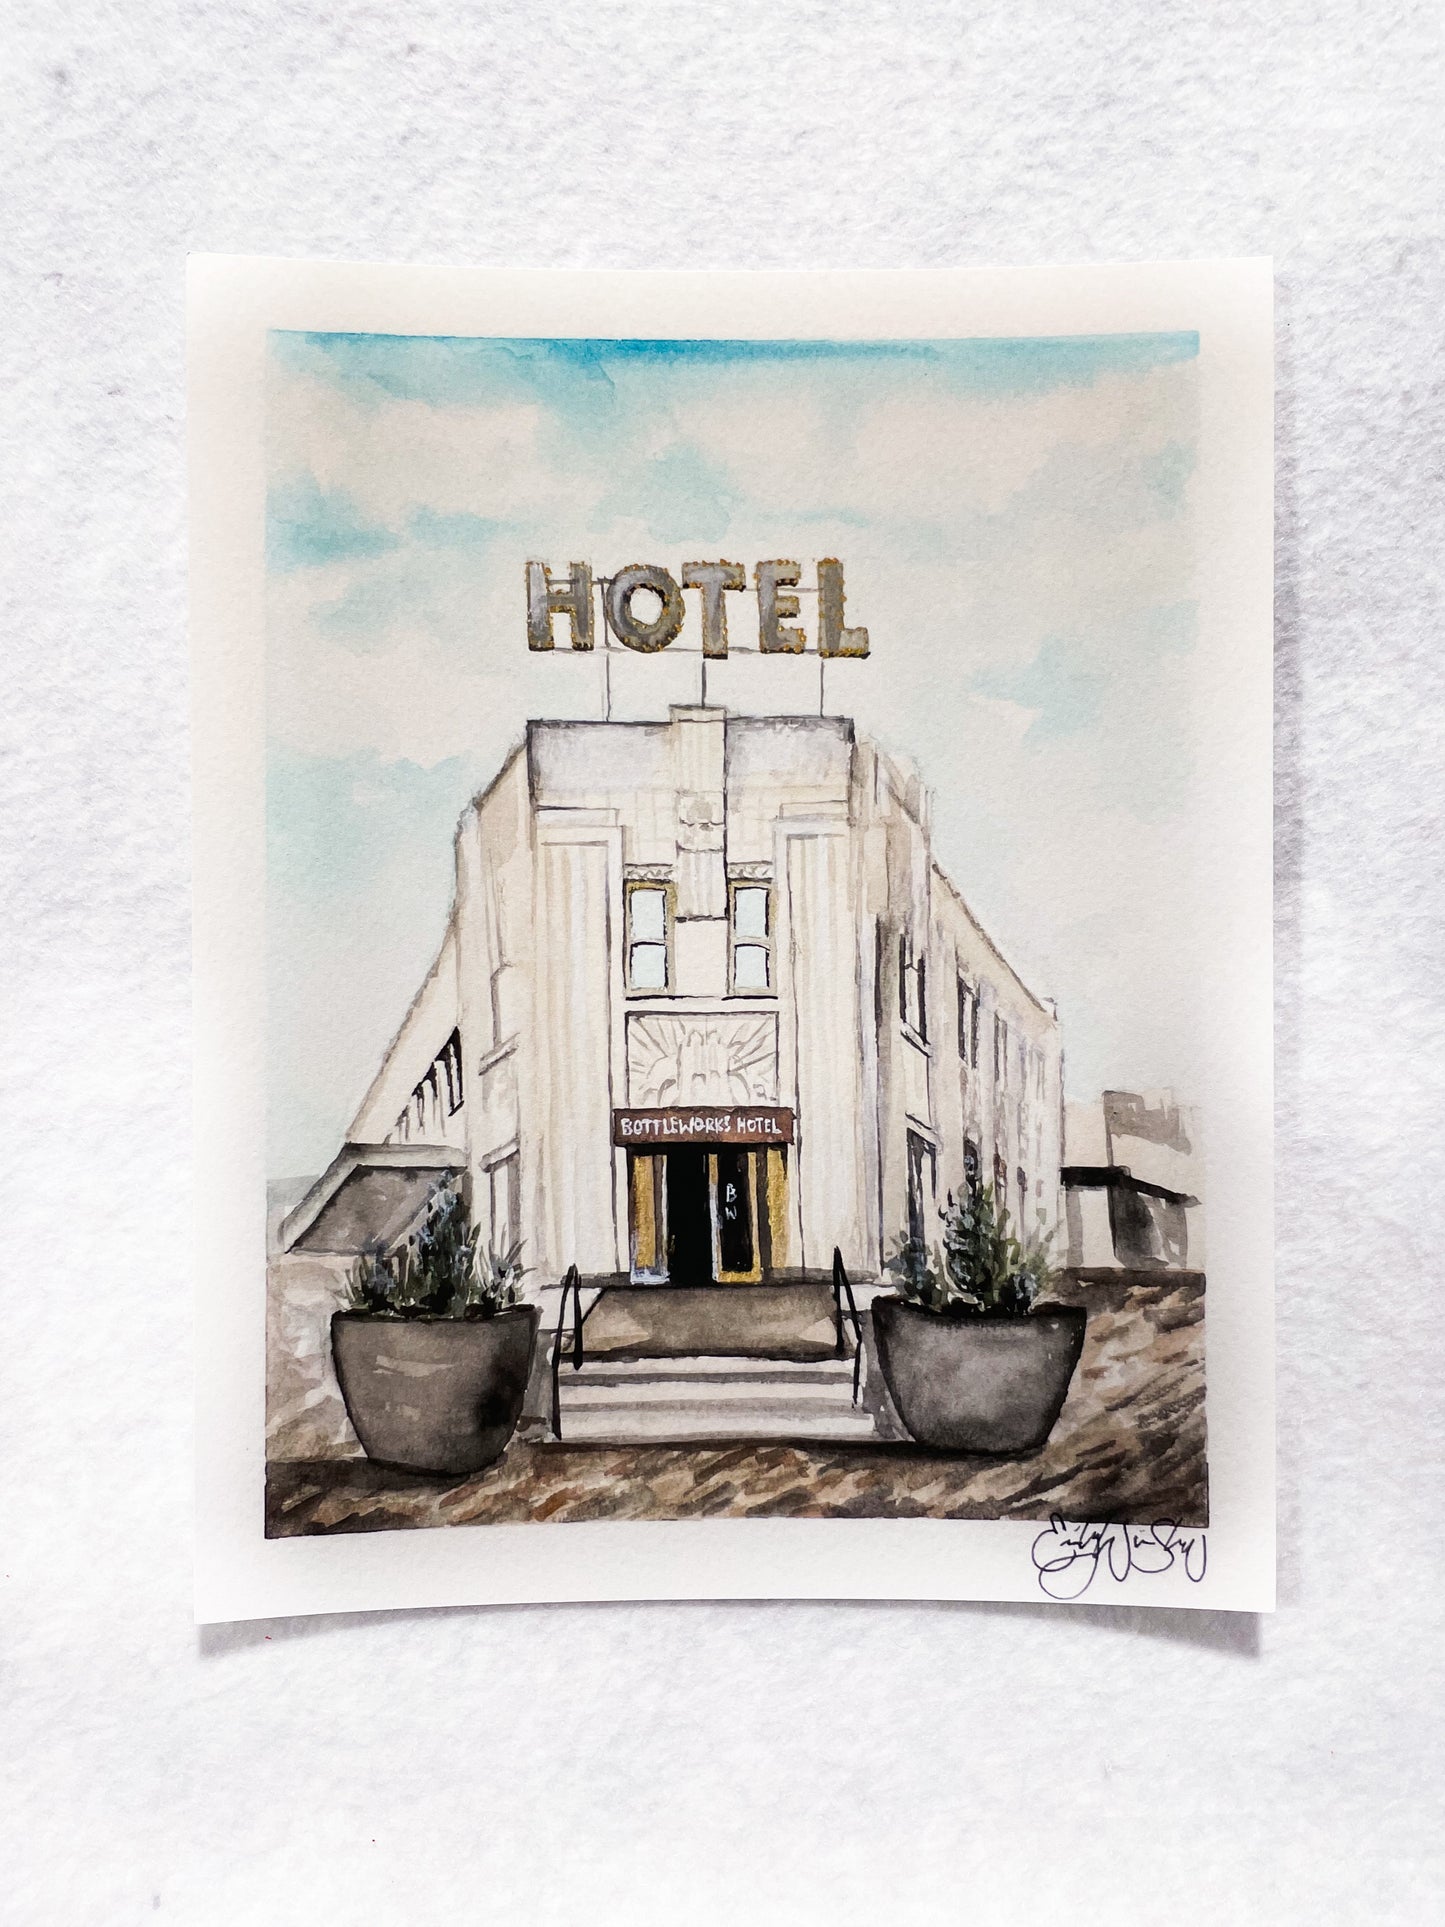 PRINT - Indianapolis Bottleworks Hotel Watercolor on Mass Ave.